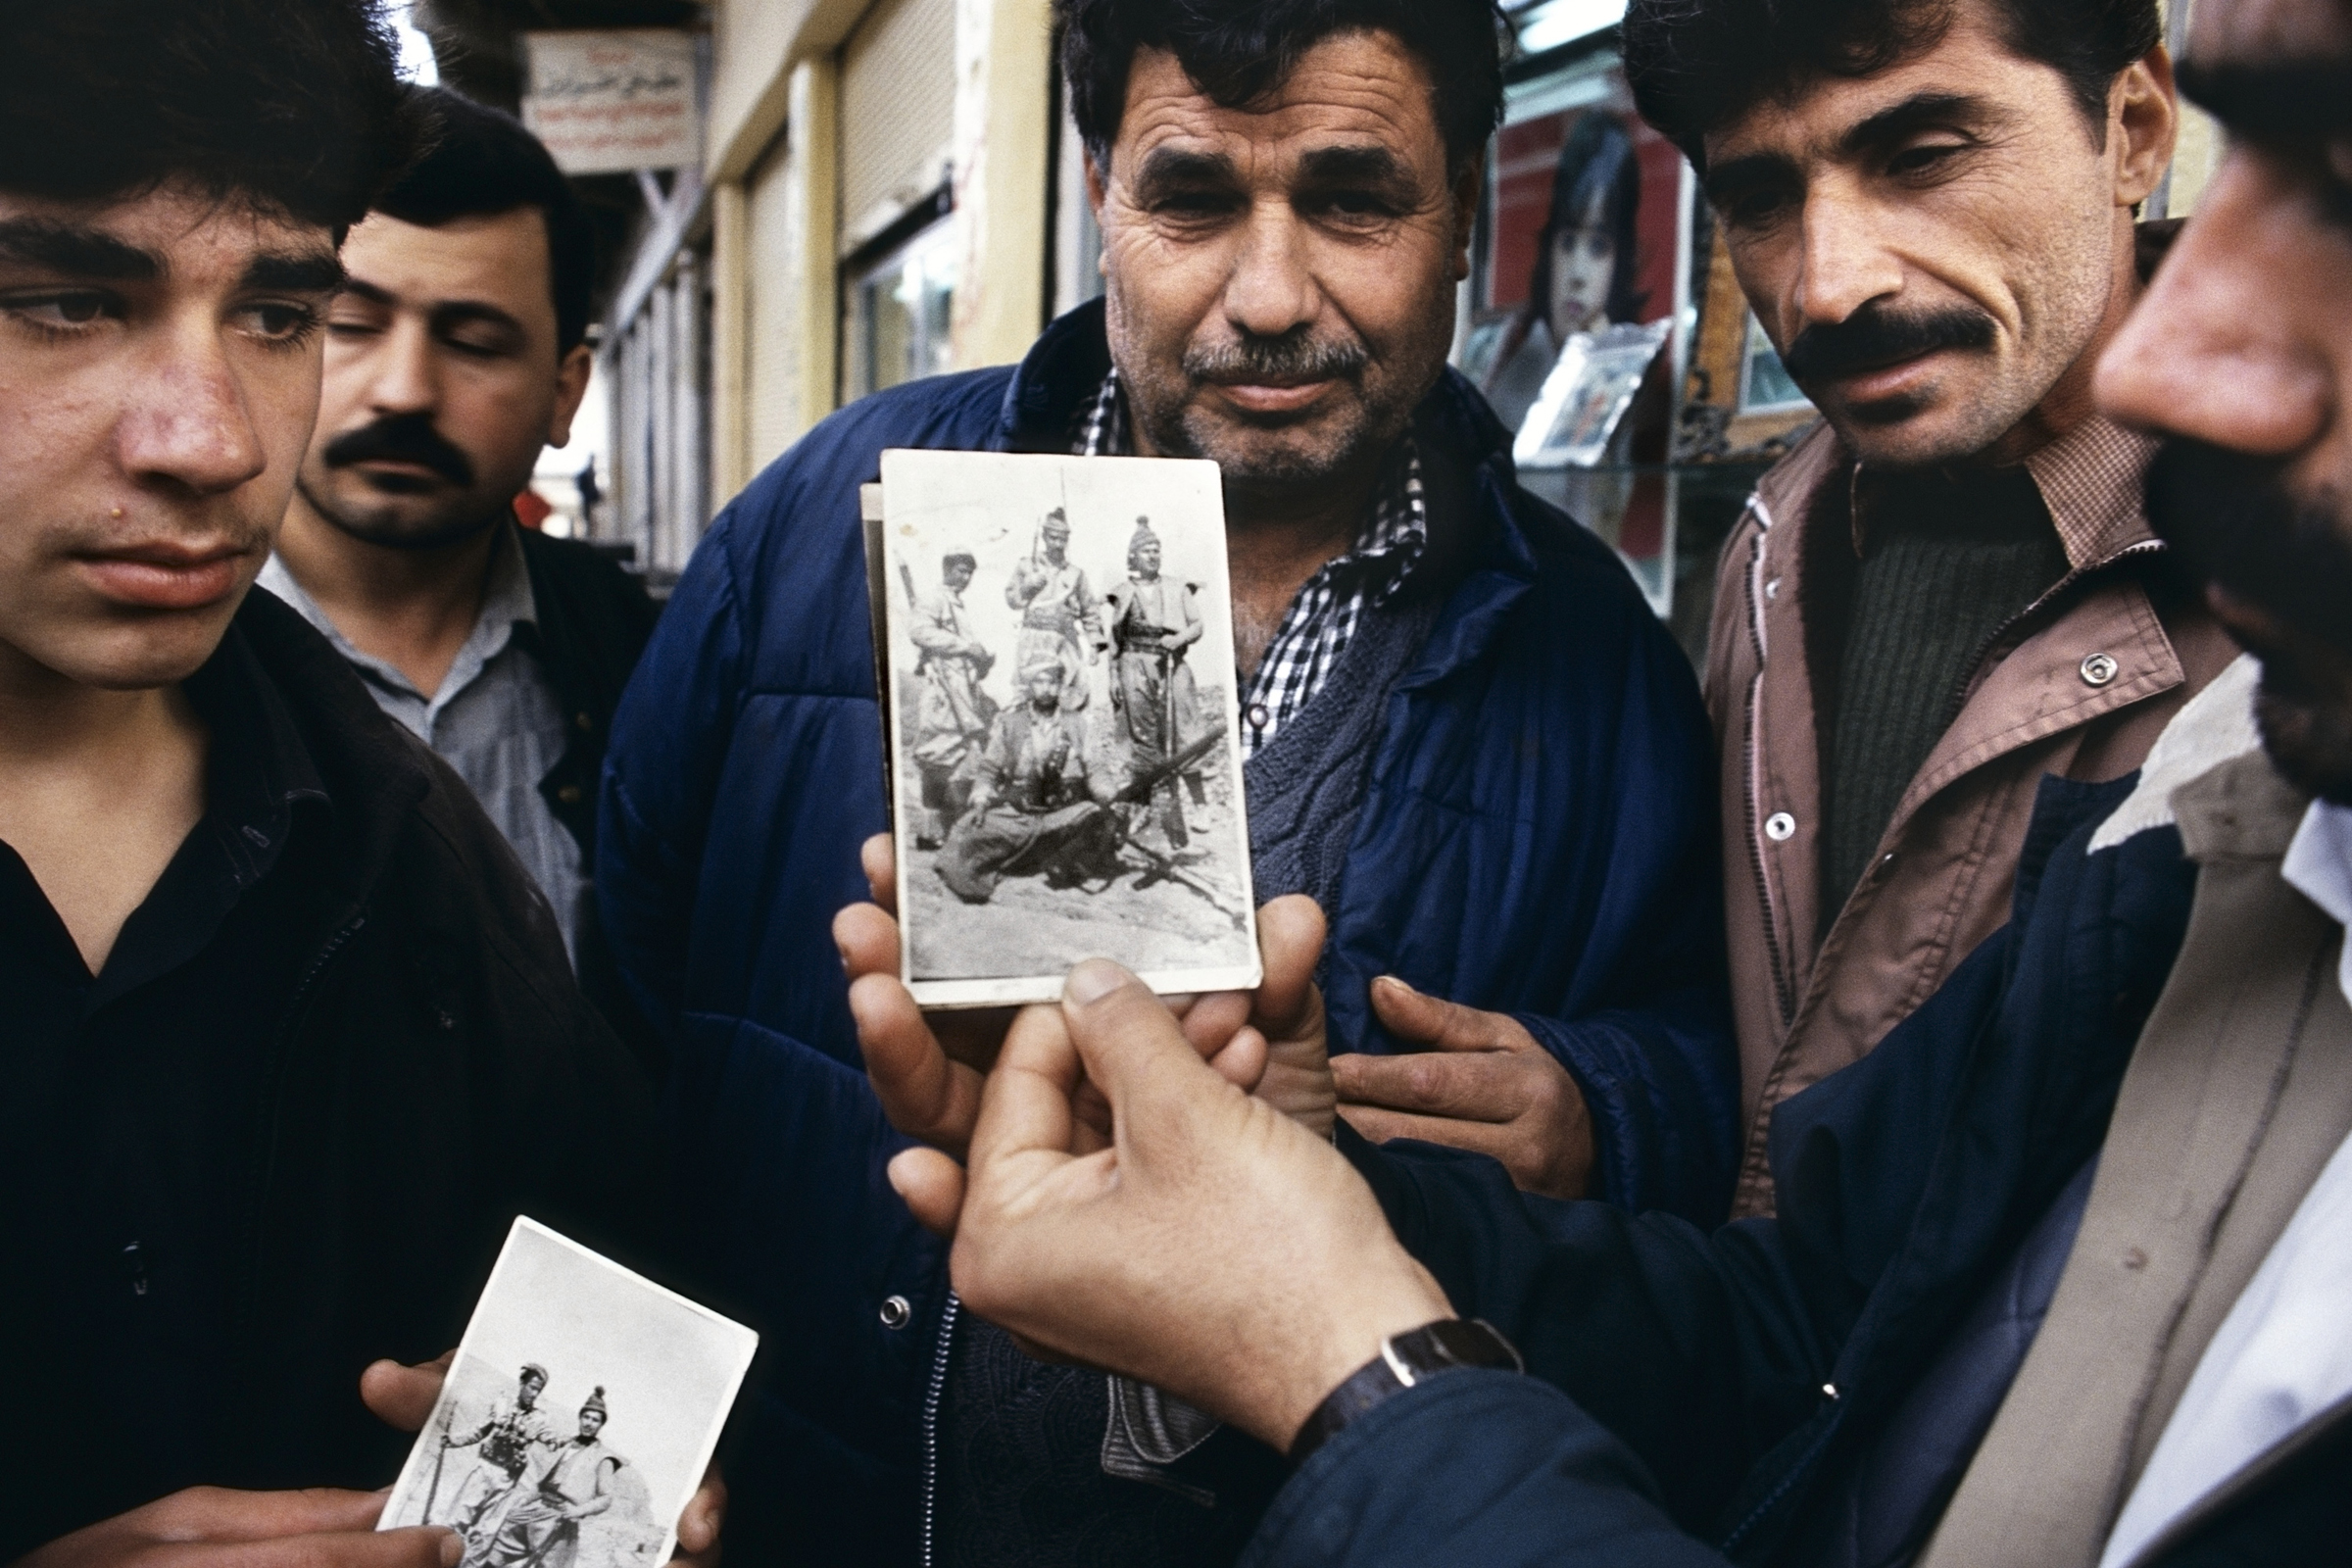 Fig. 4: Meiselas, Susan. 1991. «Jamal Kader Osman shows a picture he carries of himself as a Peshmerga fighter from the 1963 rebellion» [Photograph]
From the series «Kurdistan», Sulaymaniyah, Northern Iraq
